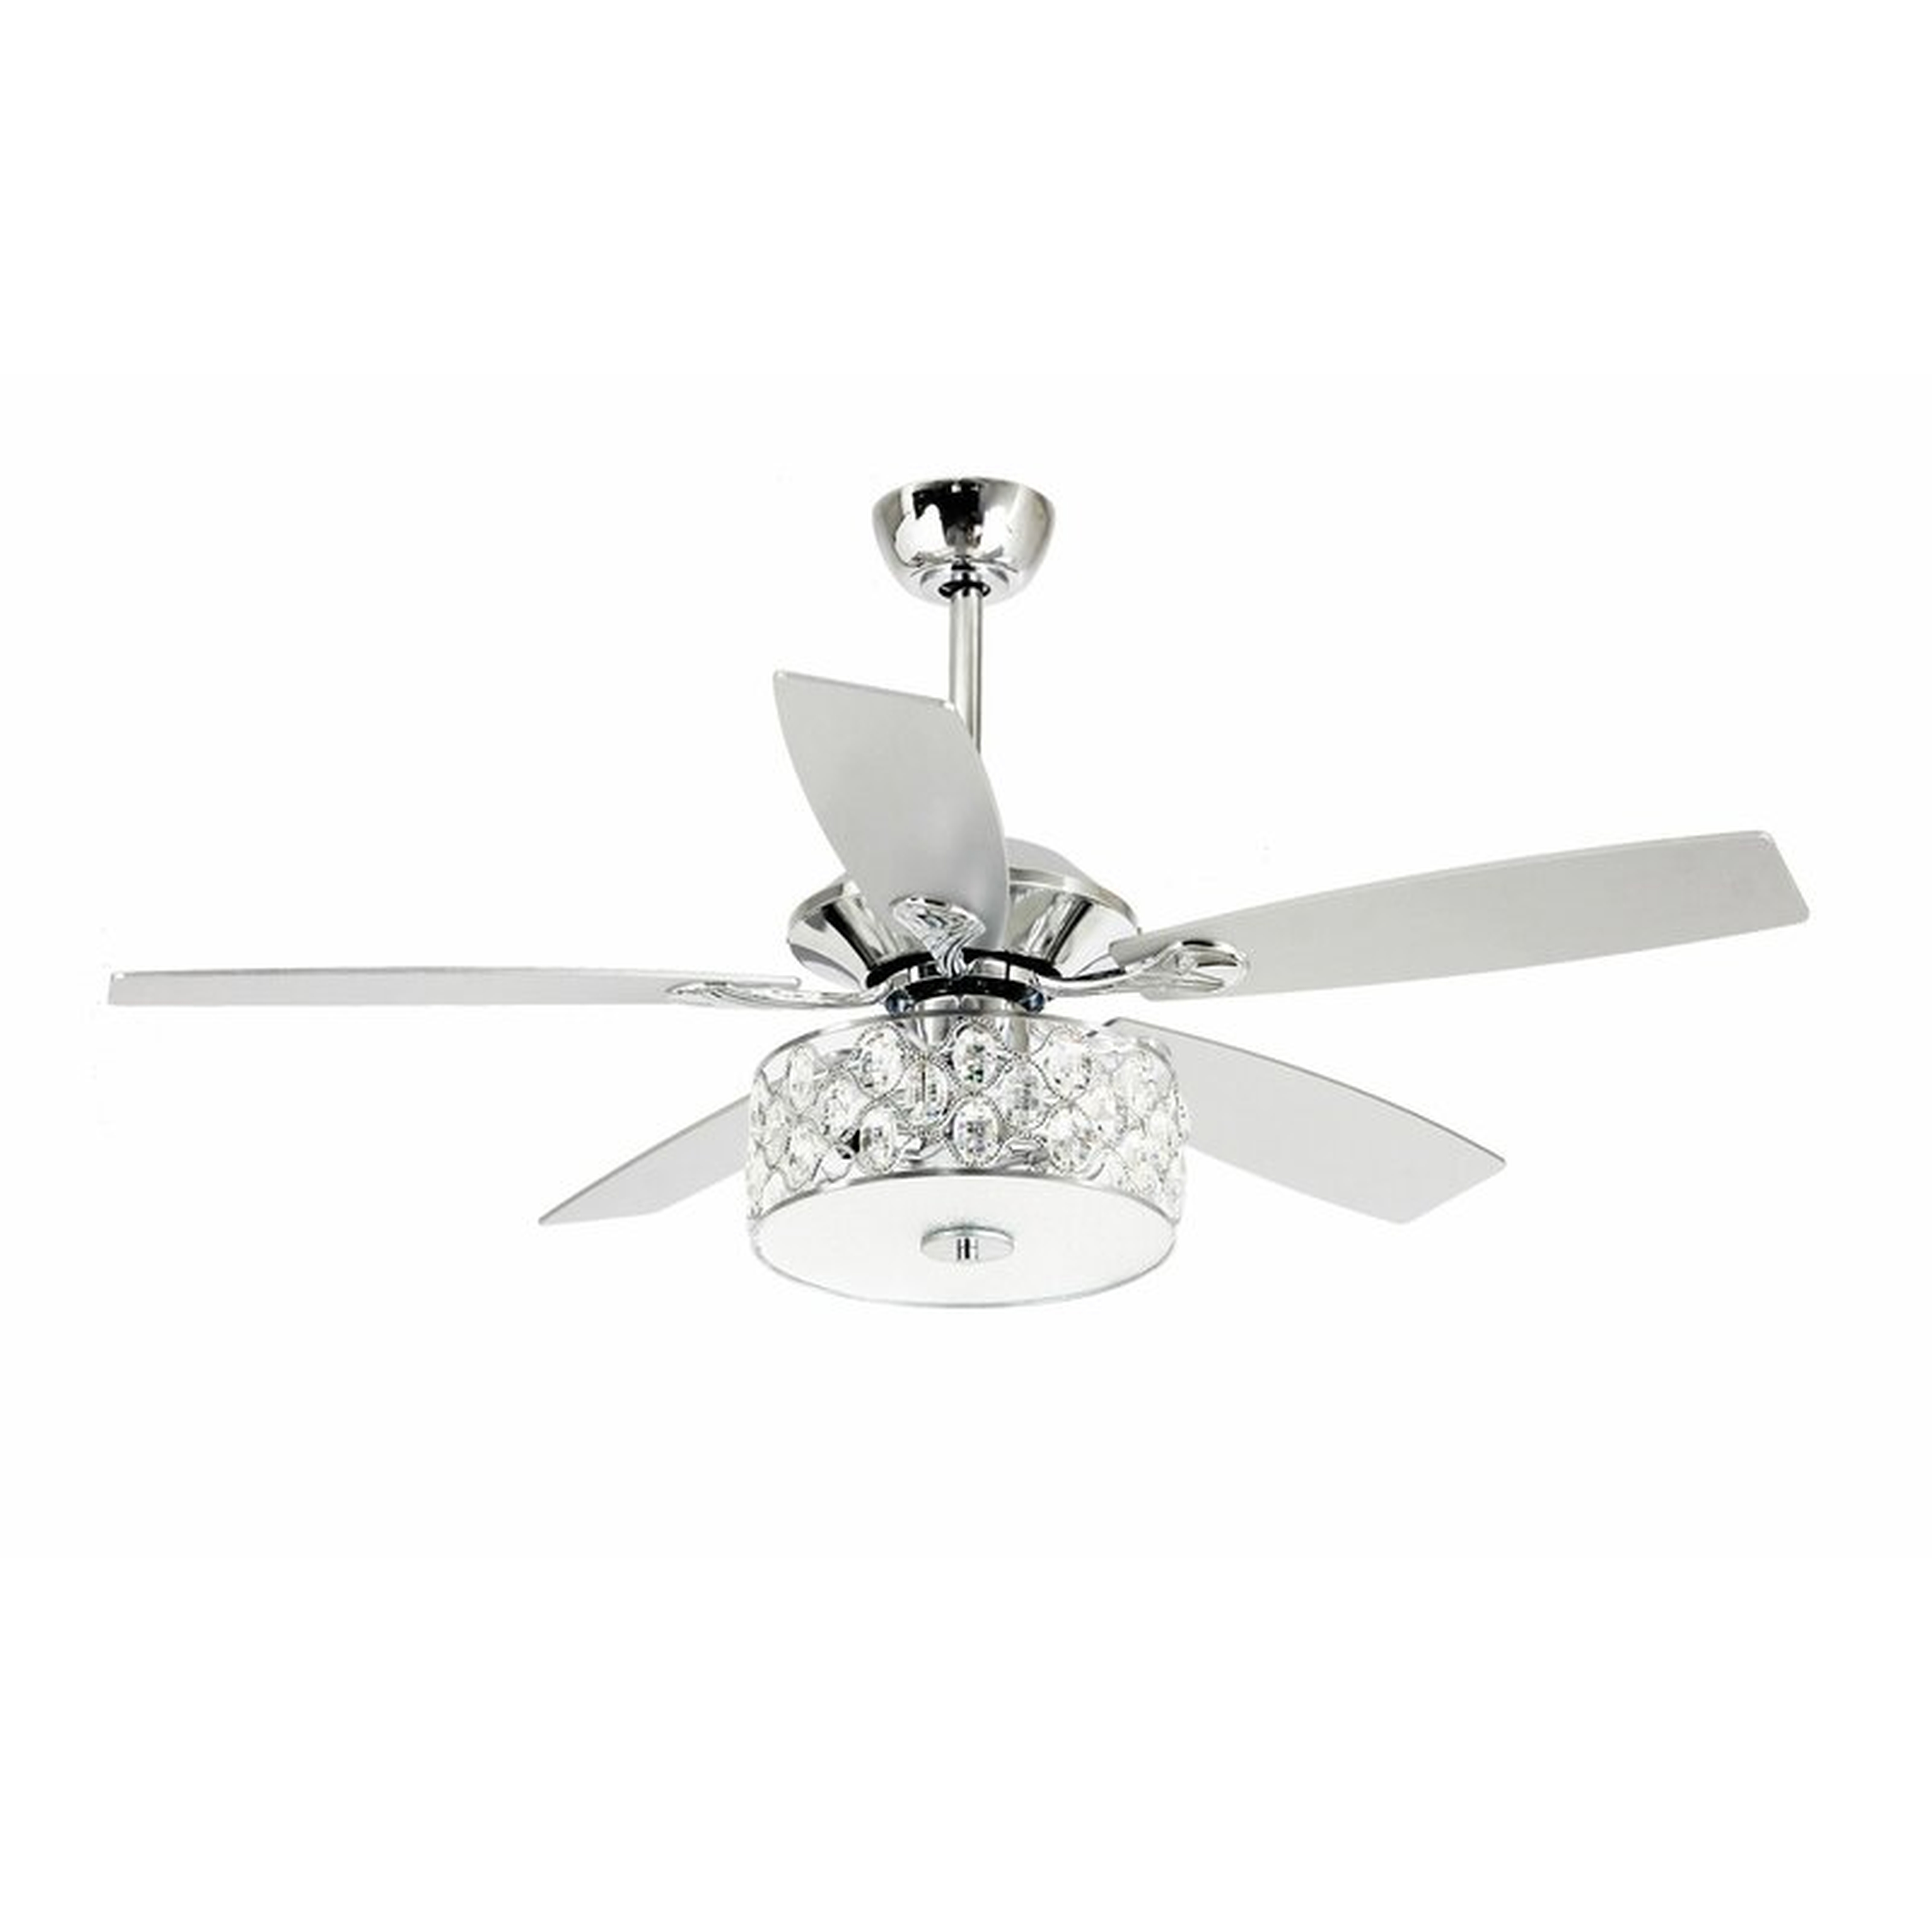 52" Amina 5 - Blade Crystal Ceiling Fan with Remote Control and Light Kit Included See More from Rosdorf Park - Wayfair